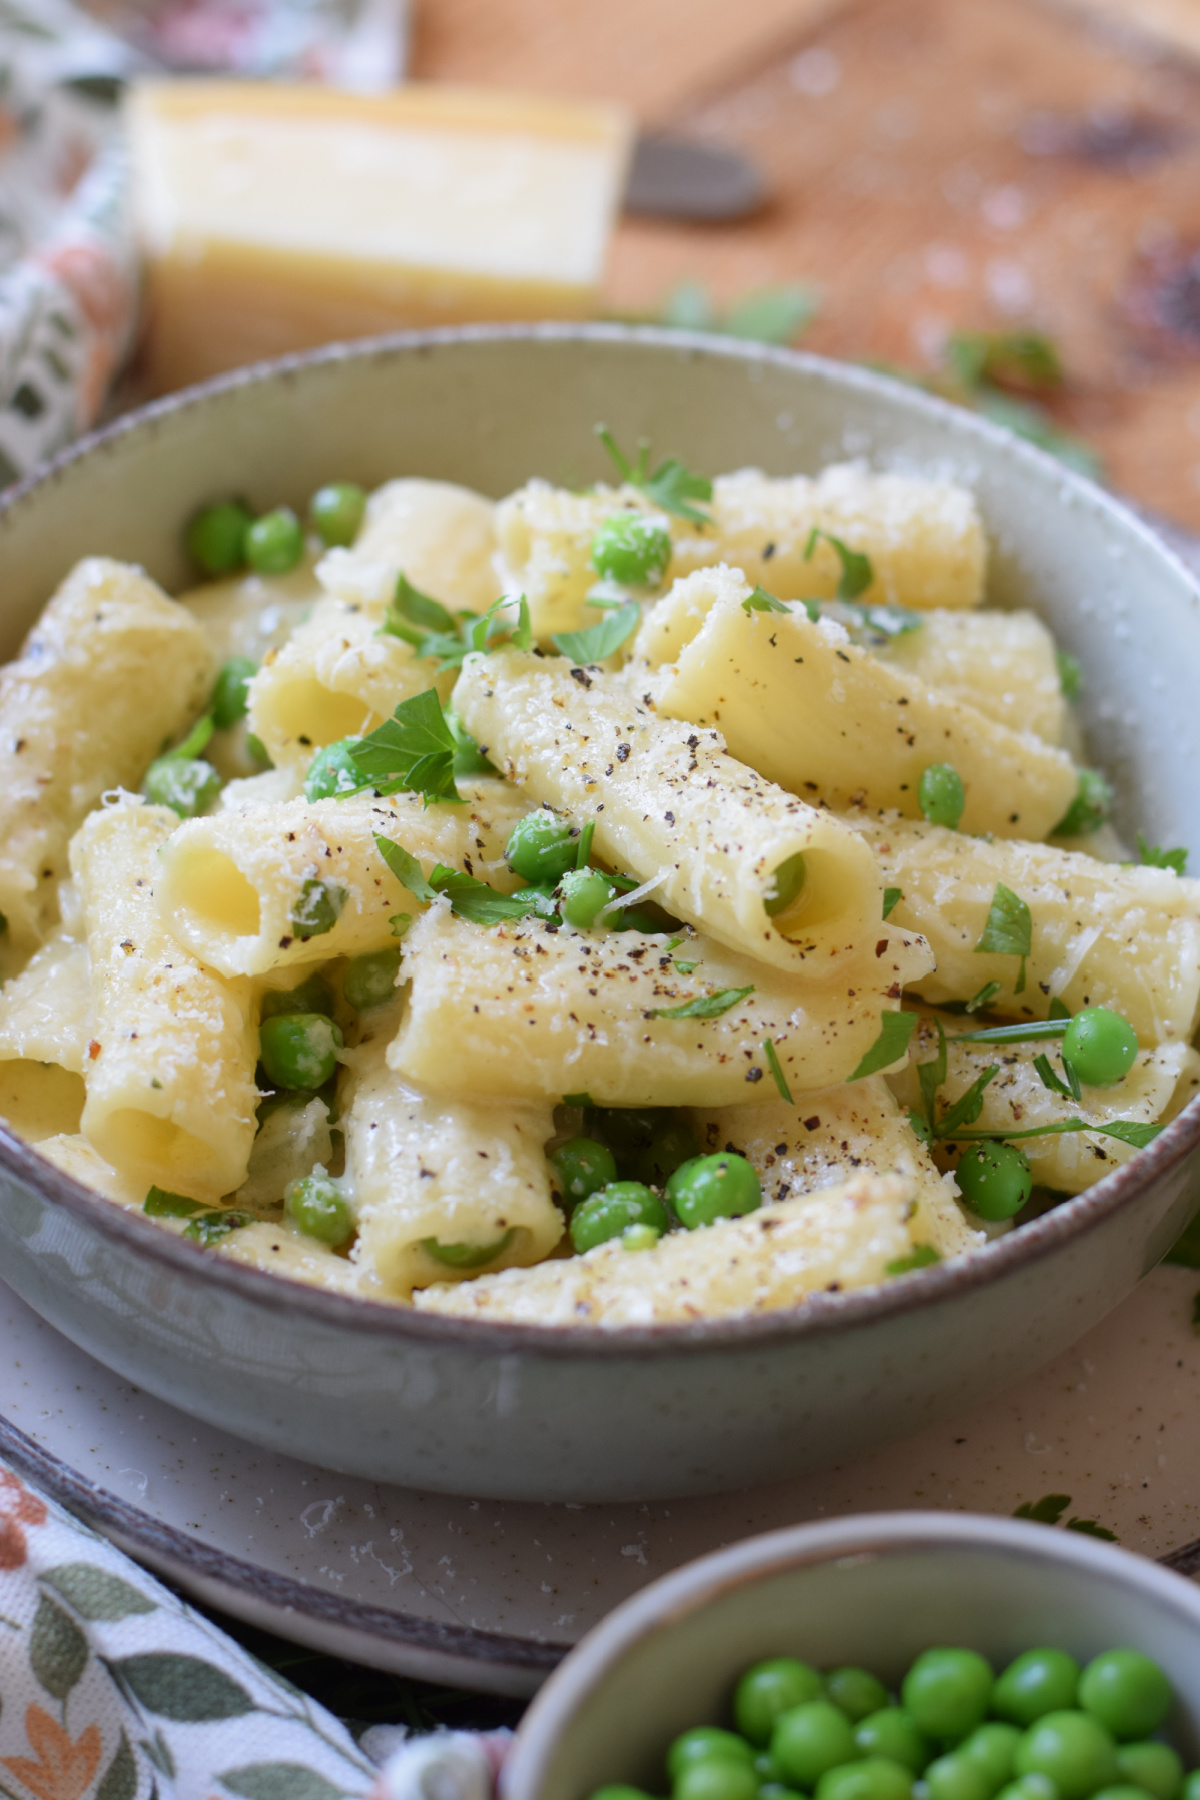 Summer Pasta with Peas and Parmesan - Julia's Cuisine